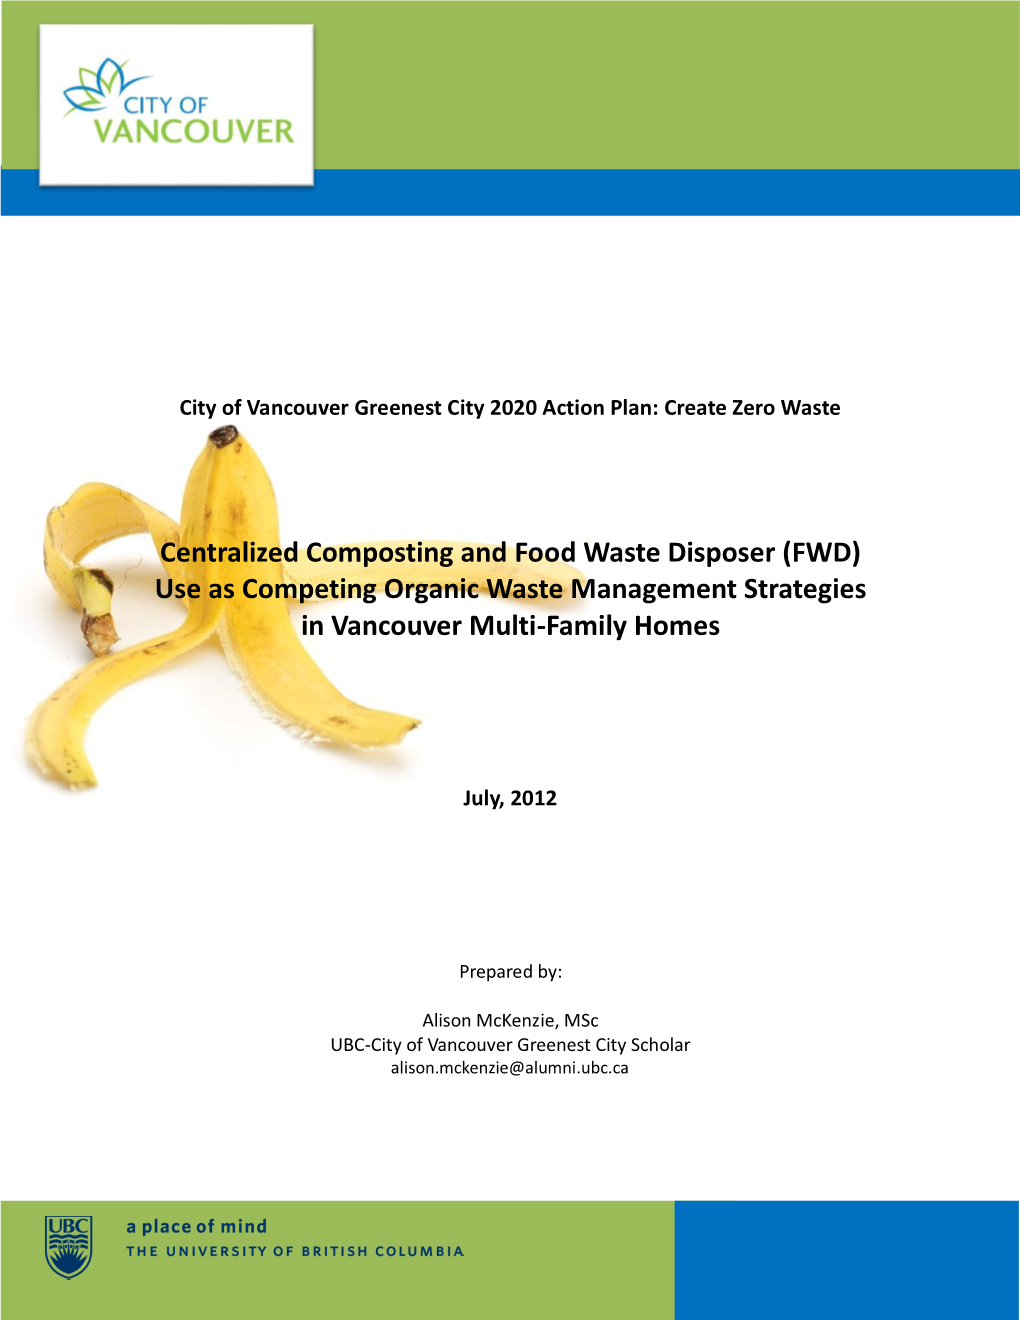 Centralized Composting and Food Waste Disposer (FWD) Use As Competing Organic Waste Management Strategies in Vancouver Multi-Family Homes